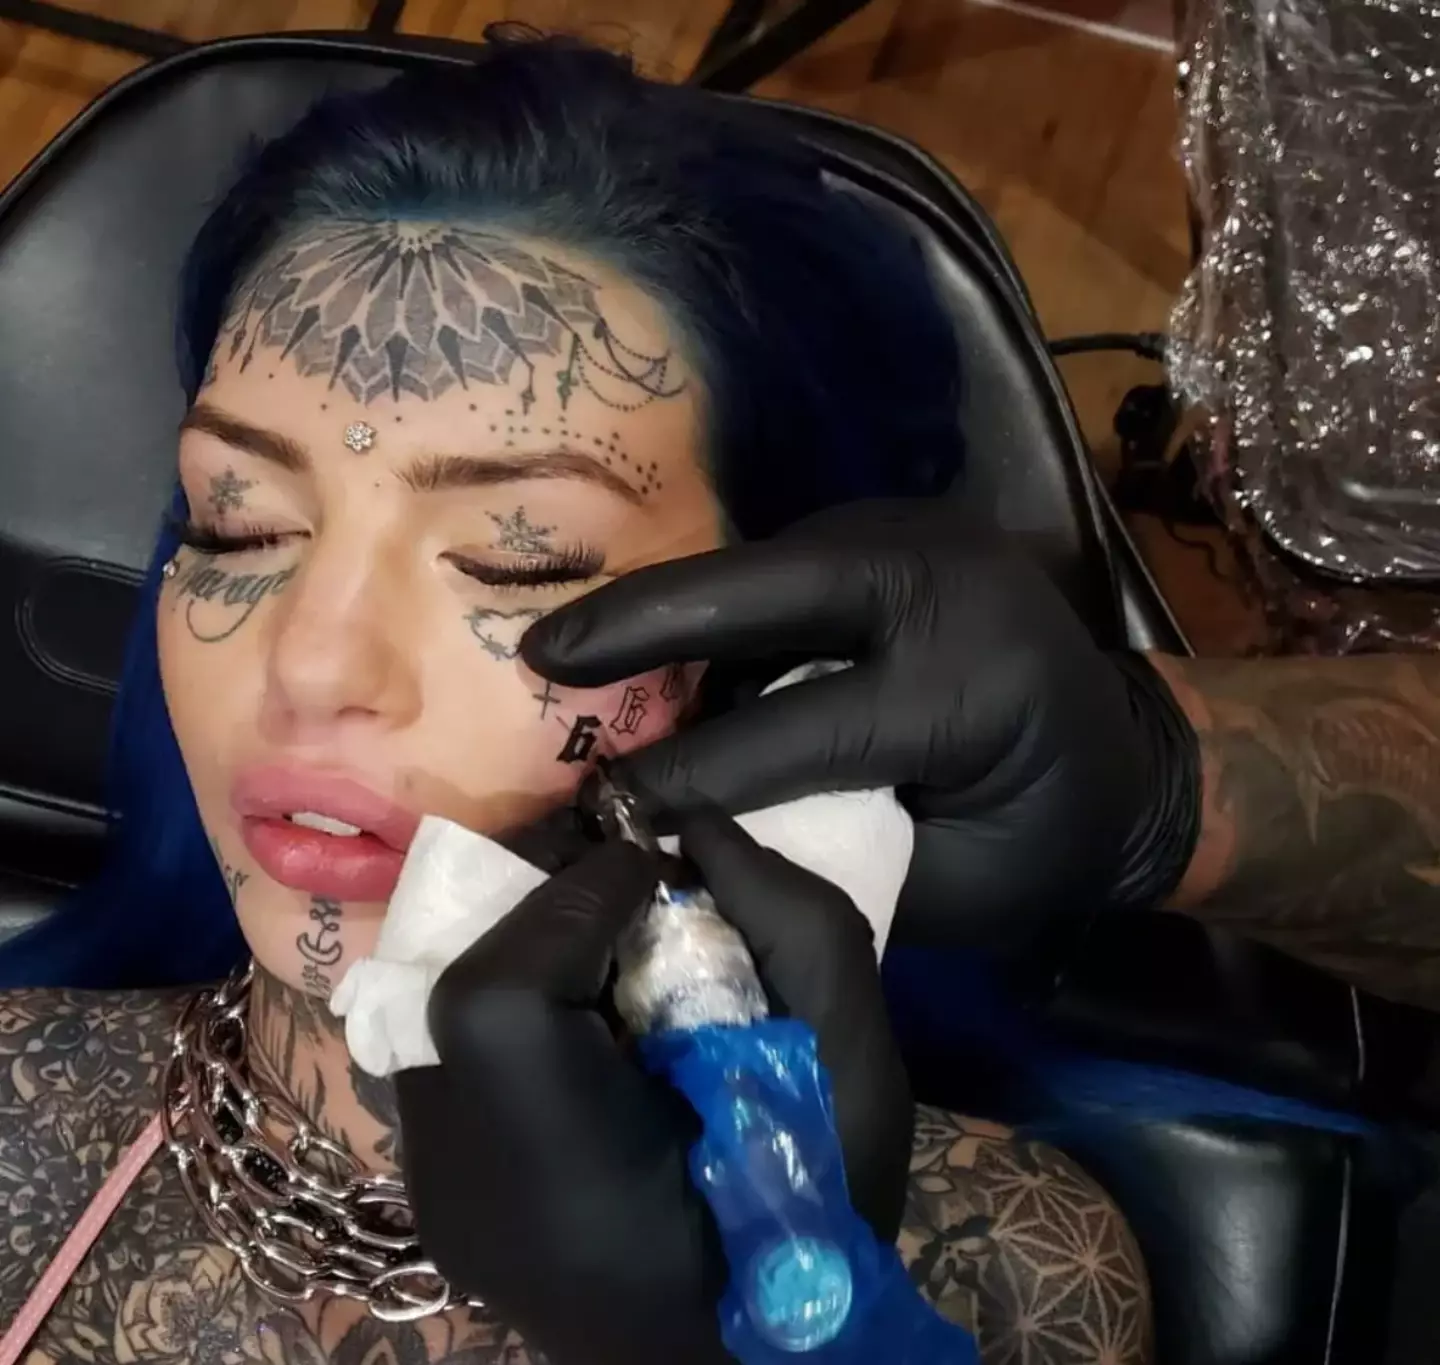 She's reportedly spent $25,000 on her tattoos.